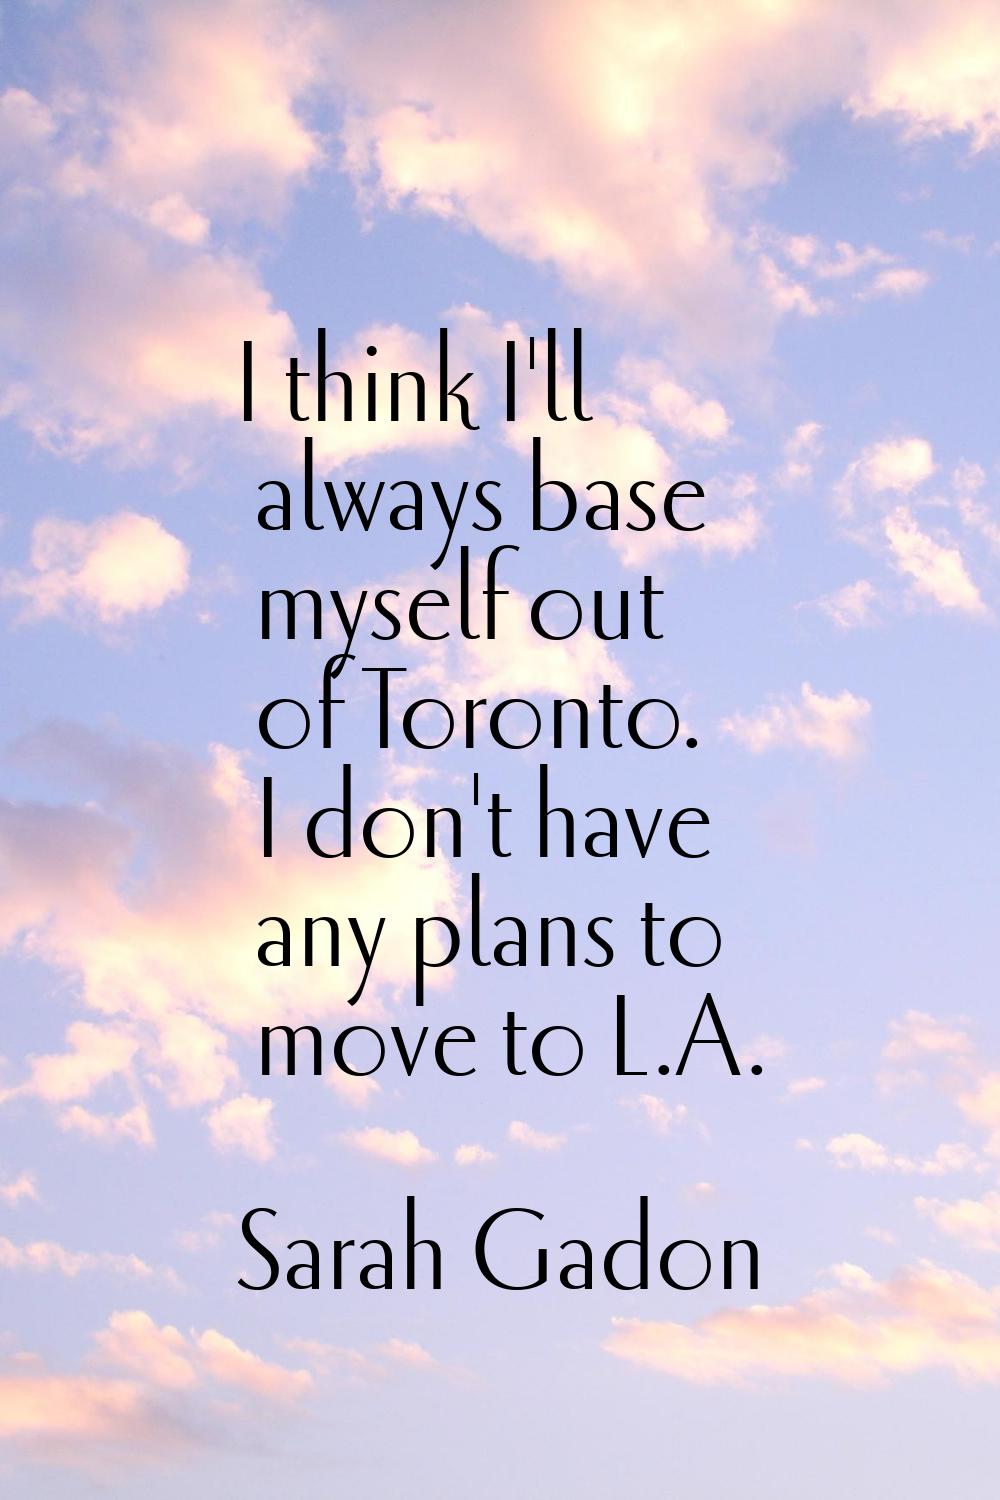 I think I'll always base myself out of Toronto. I don't have any plans to move to L.A.